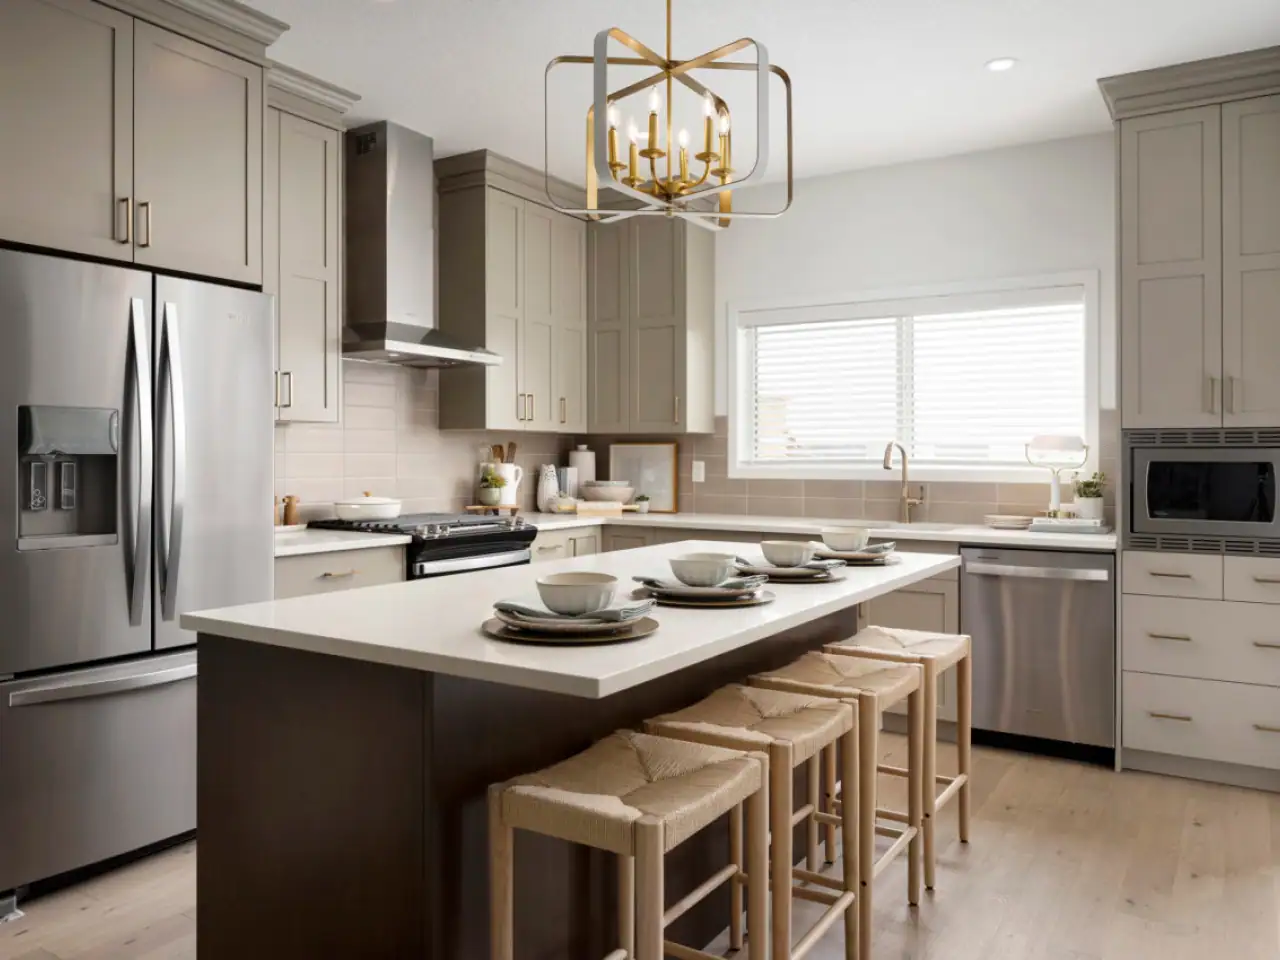 Well-appointed kitchen with modern appliances, organized countertops, and a clean, contemporary design, offering a functional and inviting space for culinary activities.